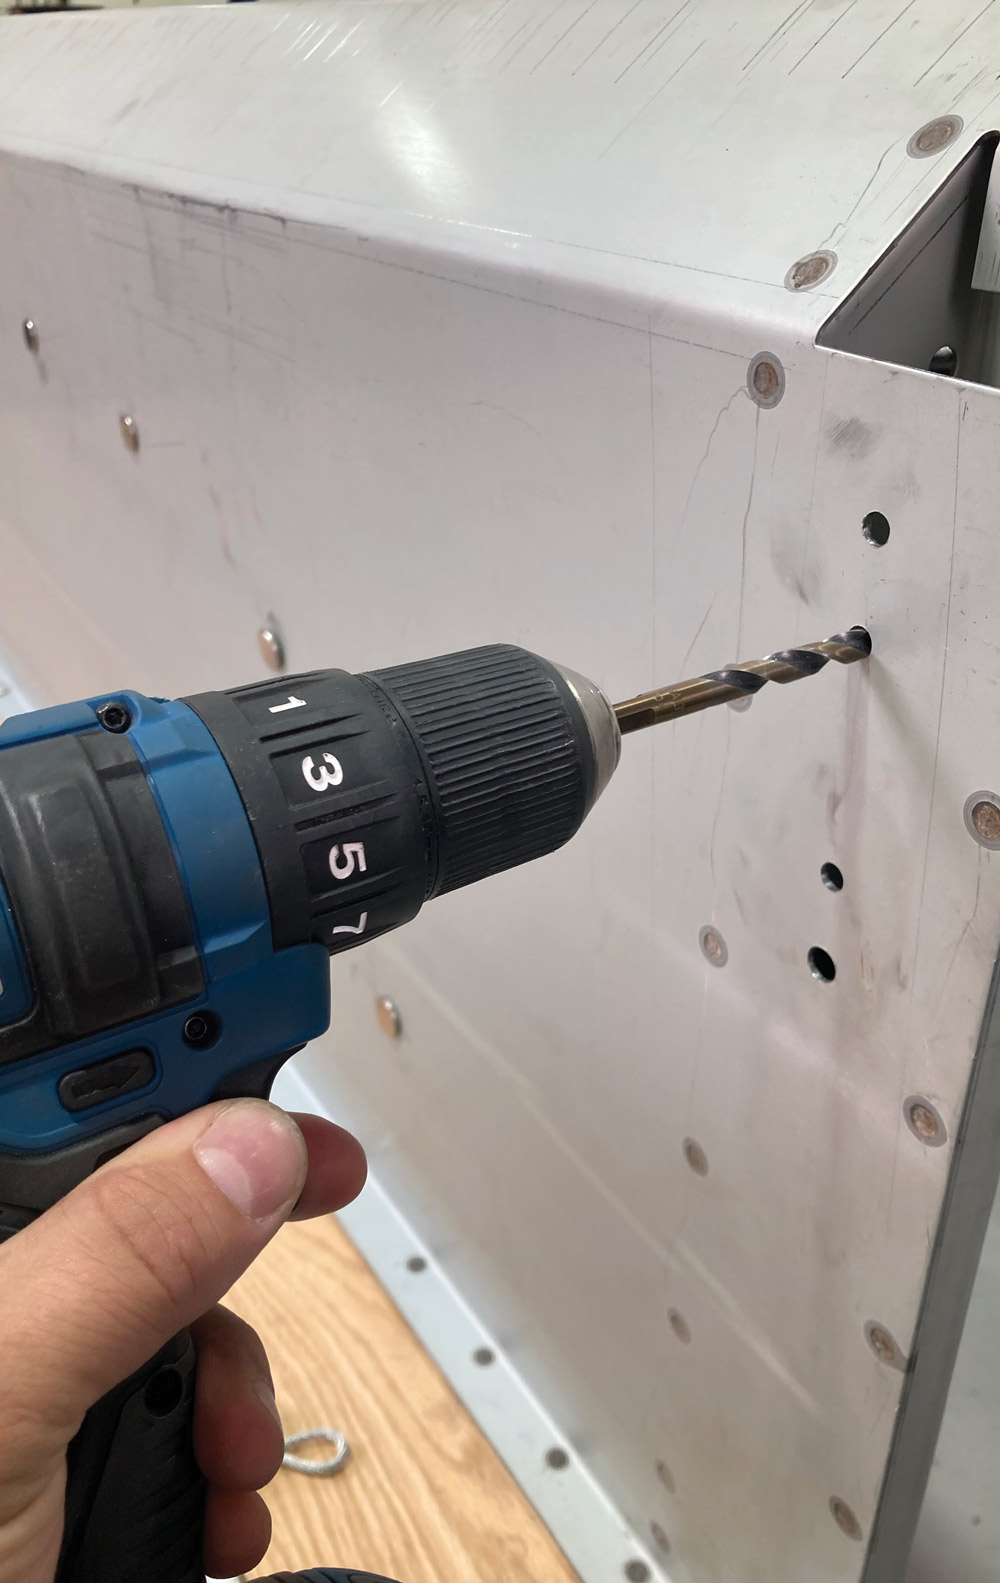 drill being used to make holes